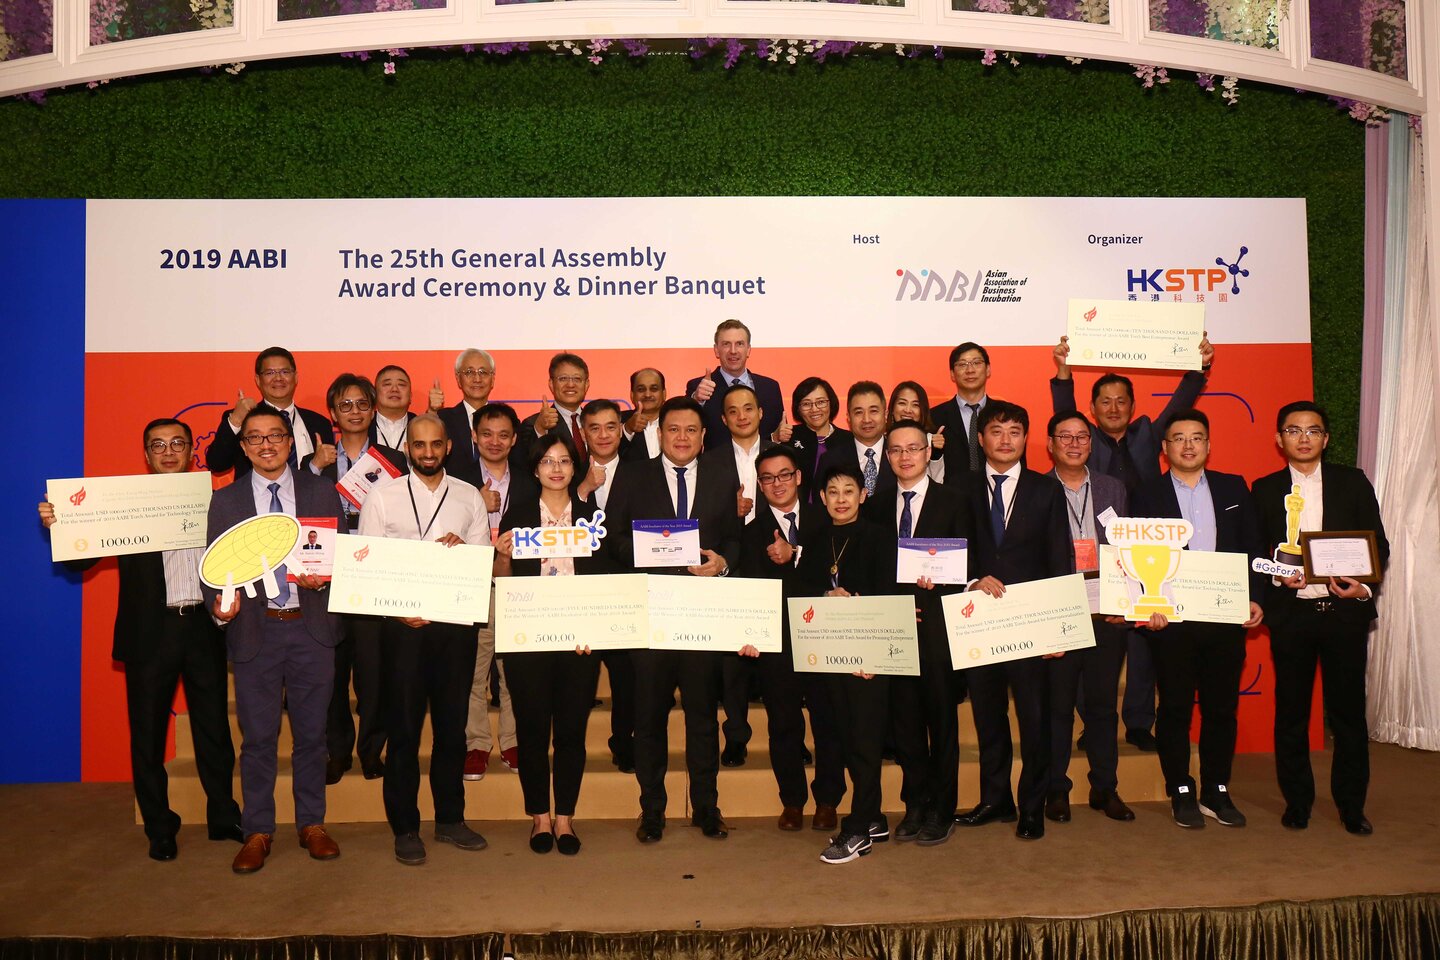 20191107-aabi_5-HKSTP GARNERS PRESTIGIOUS INCUBATOR OF THE YEAR AT 2019 AABI AWARDS CEREMONY